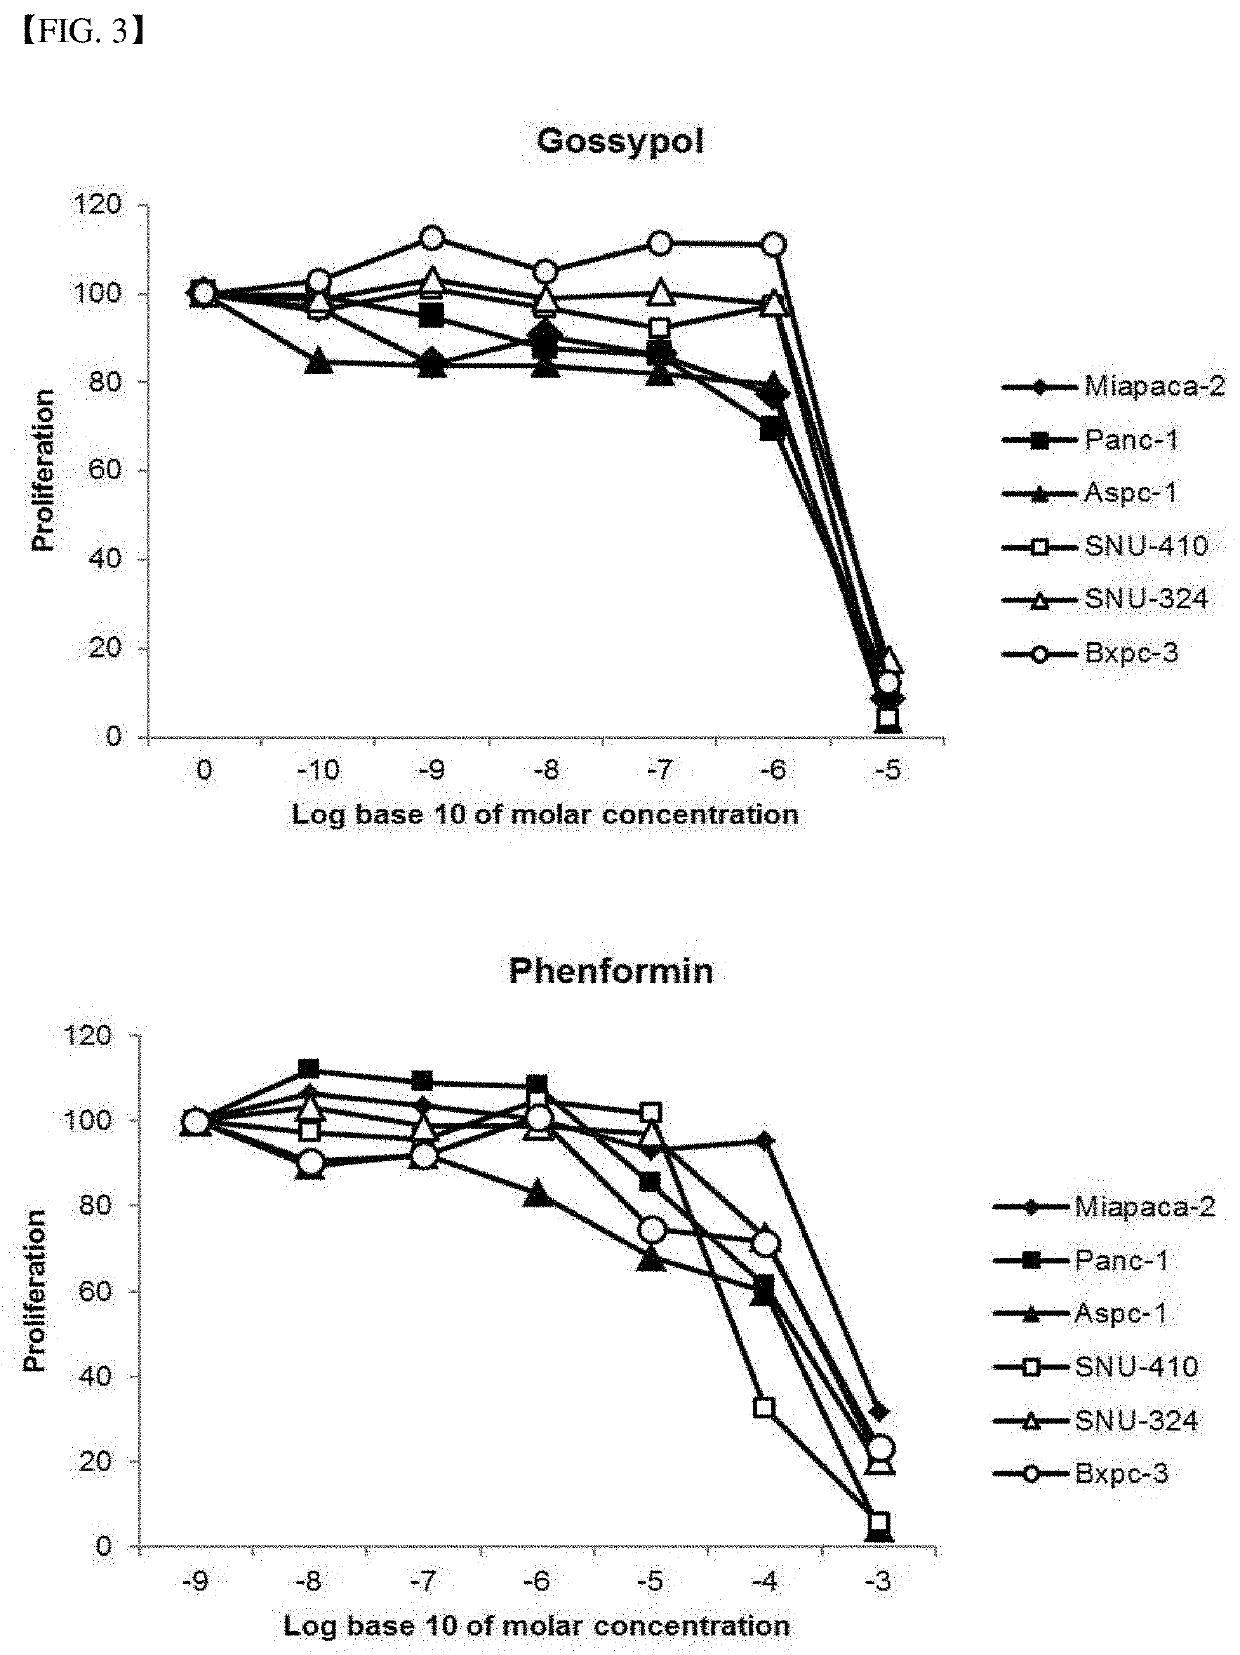 Pharmaceutical composition for preventing and treating pancreatic cancer, containing gossypol and phenformin as active ingredients